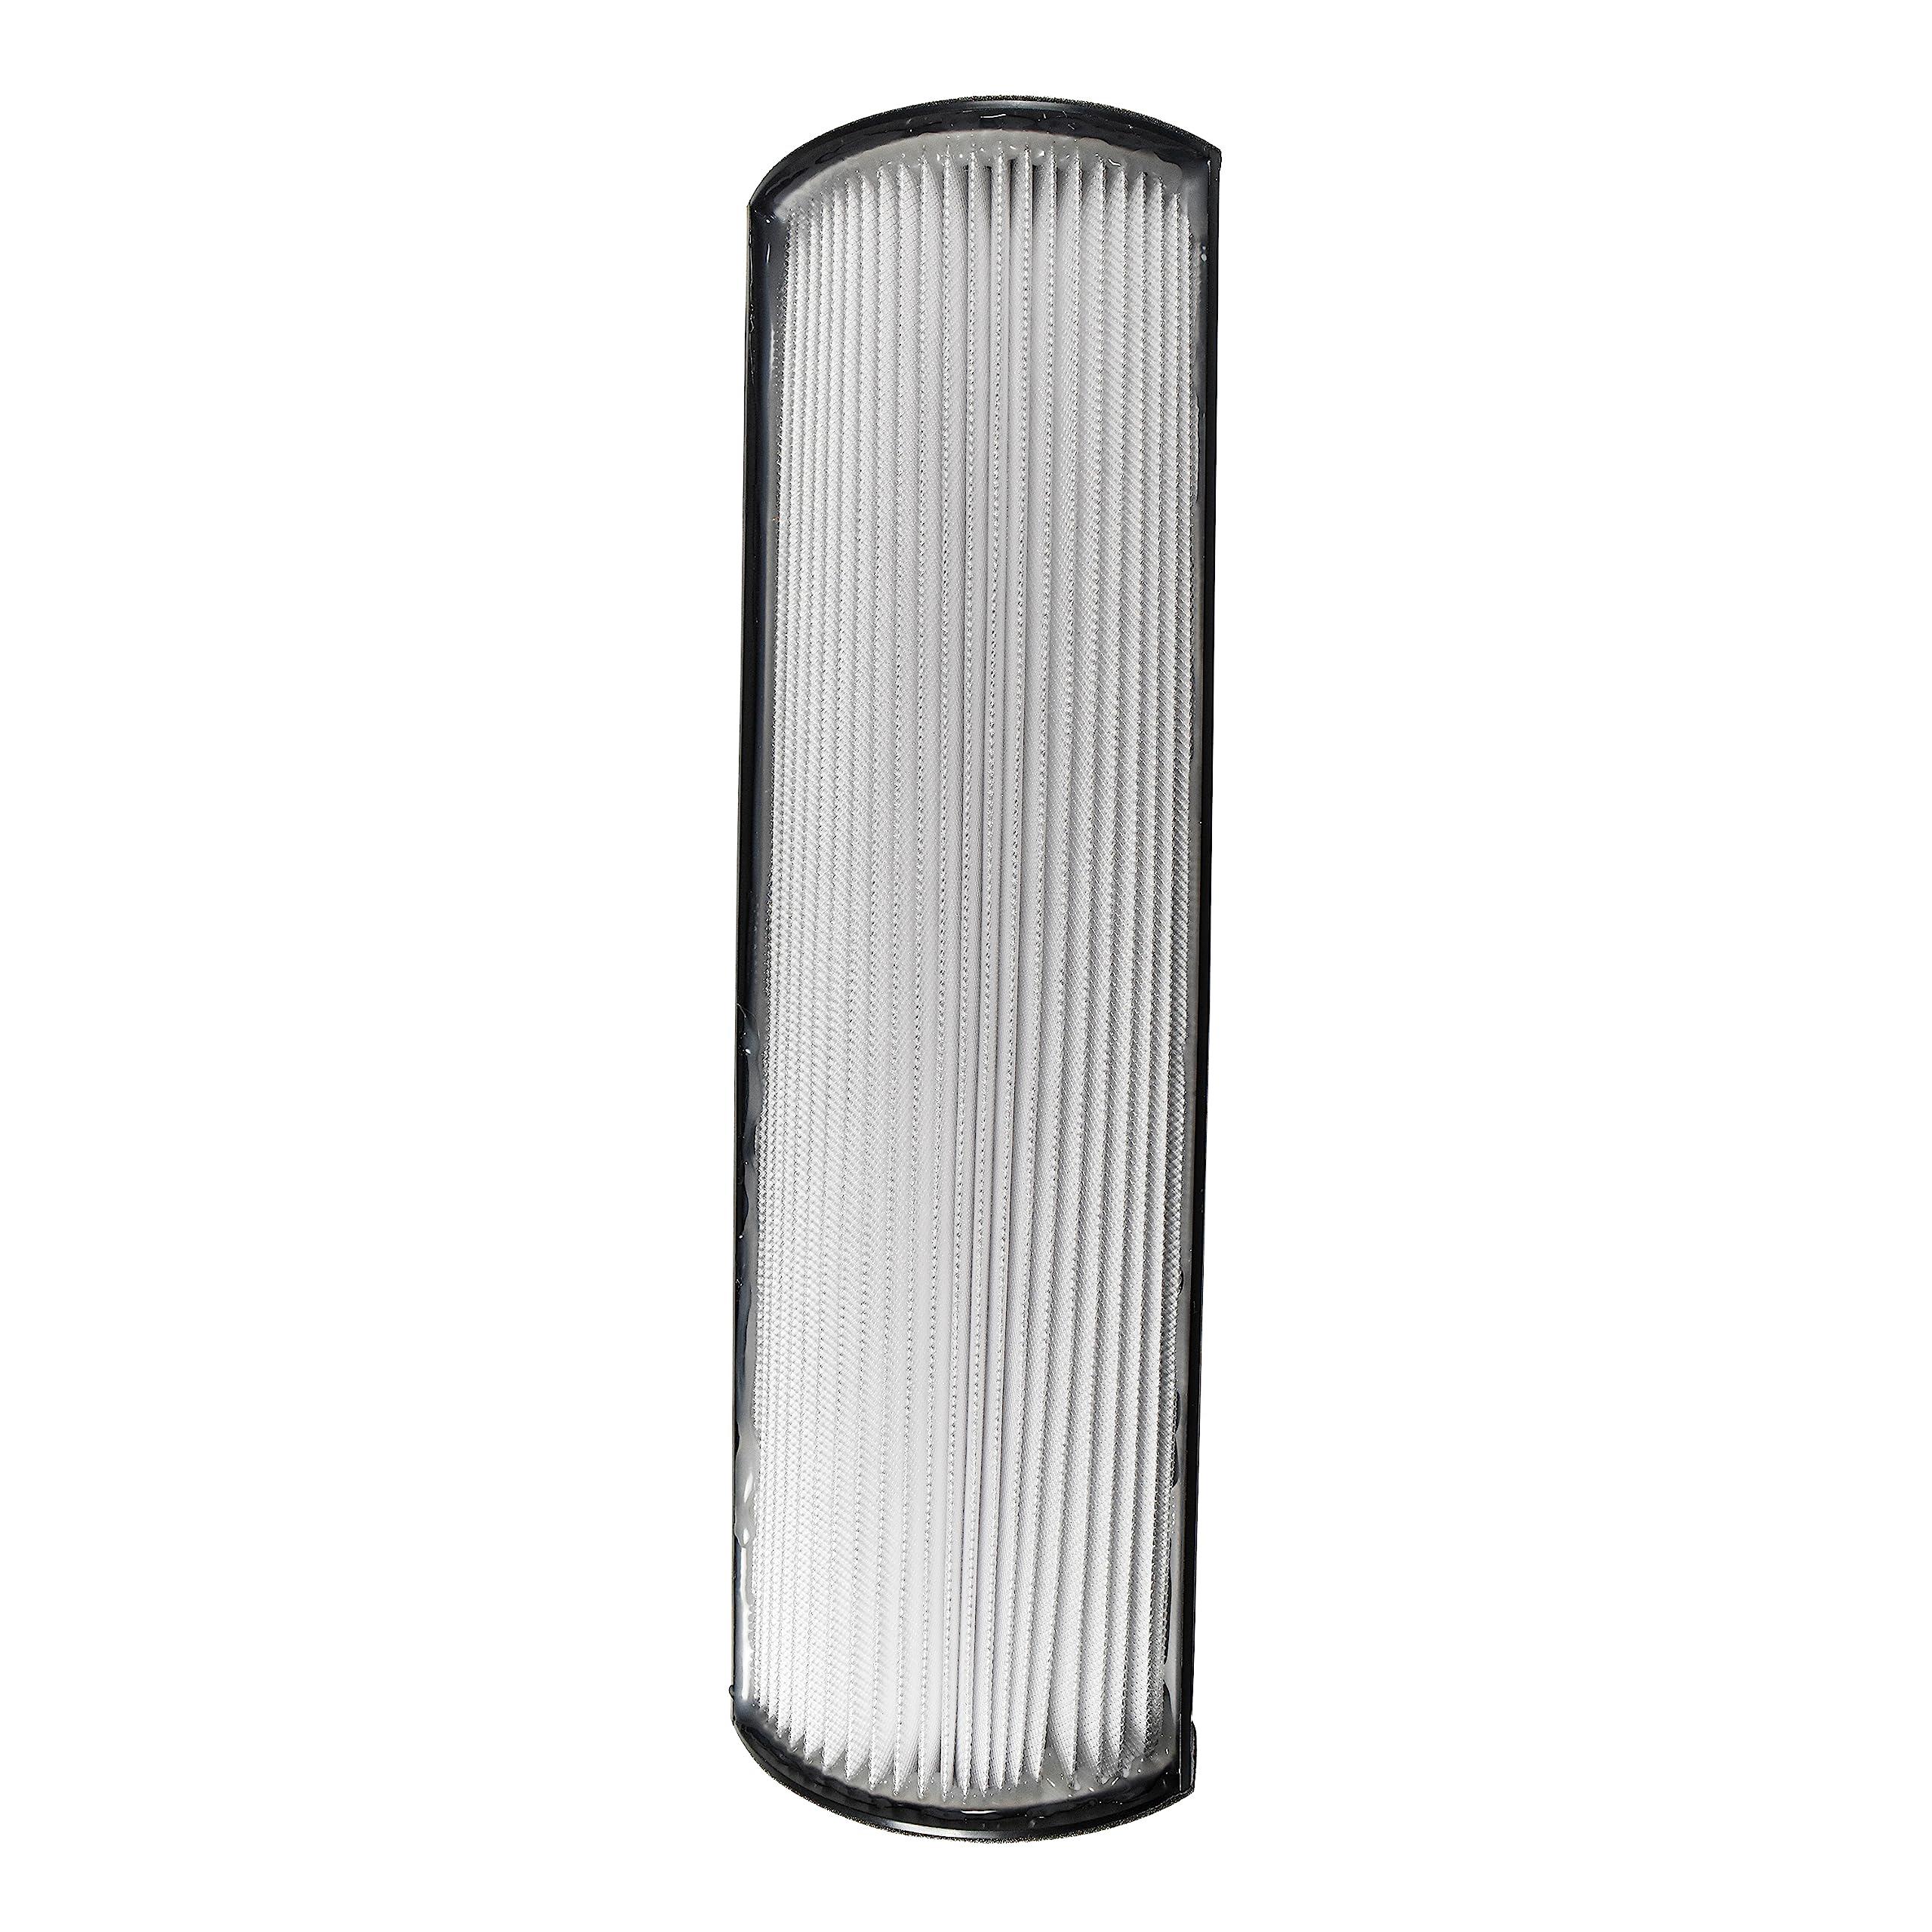 hqrp hepa filter compatible with envion therapure tpp440f tpp440 tpp540 tpp640 tpp640s air purifier